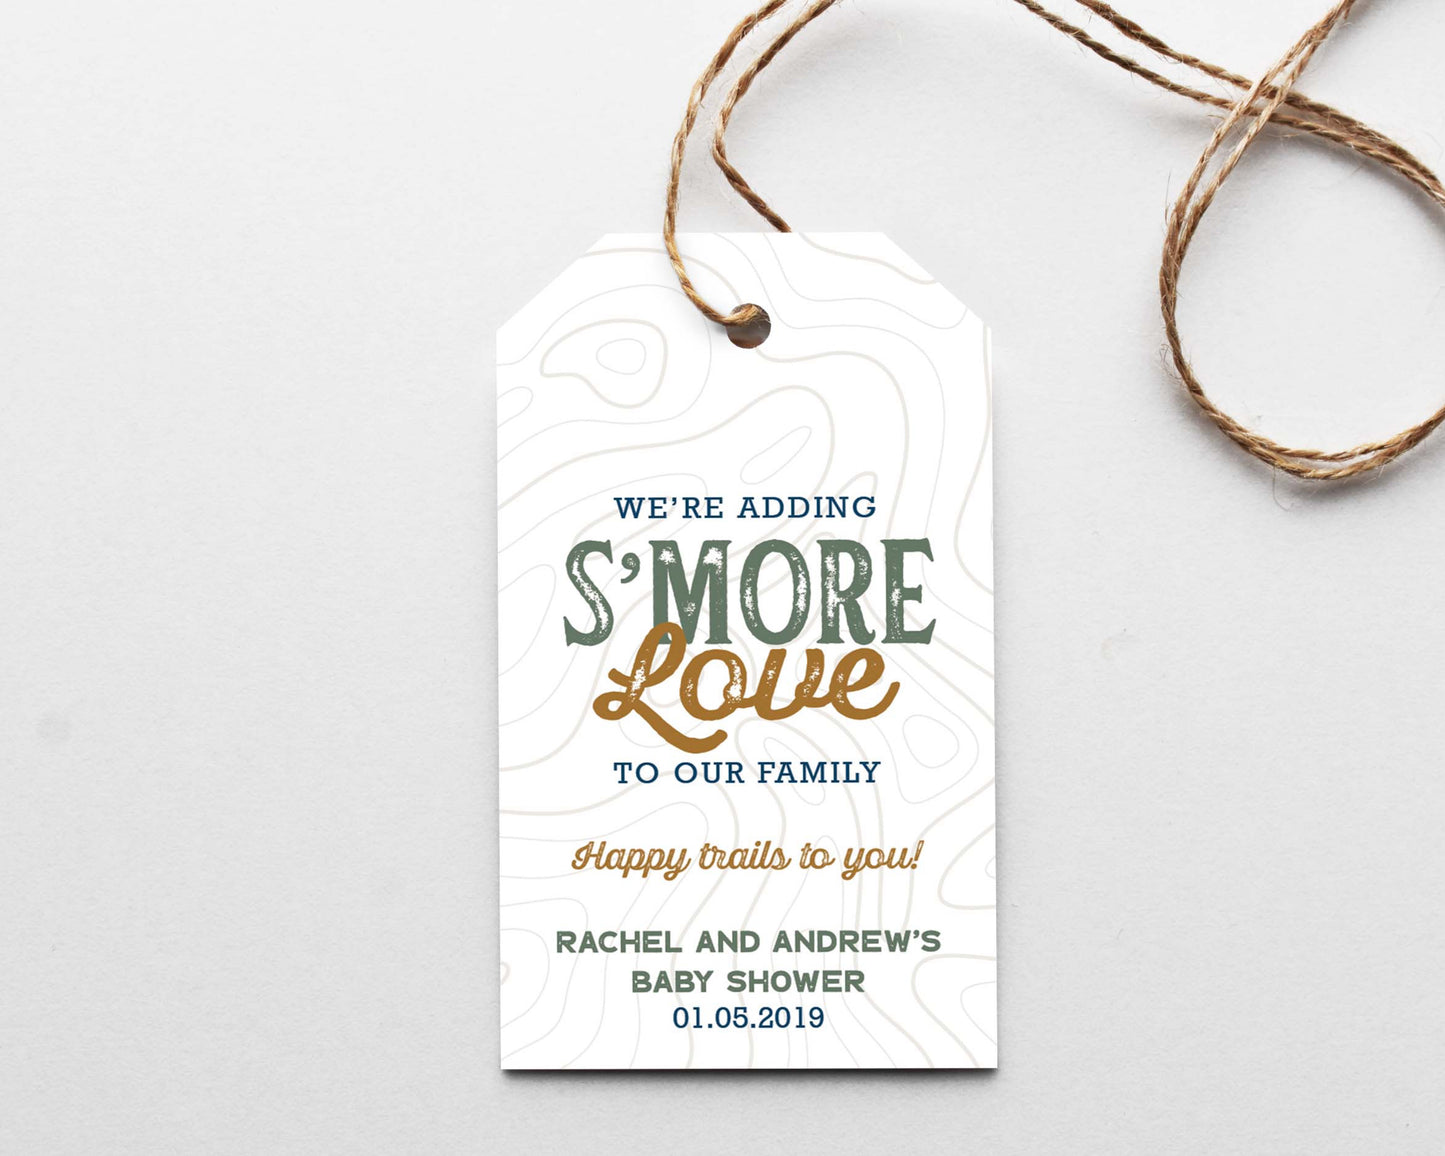 We're adding s'more love to our family baby shower favor tag